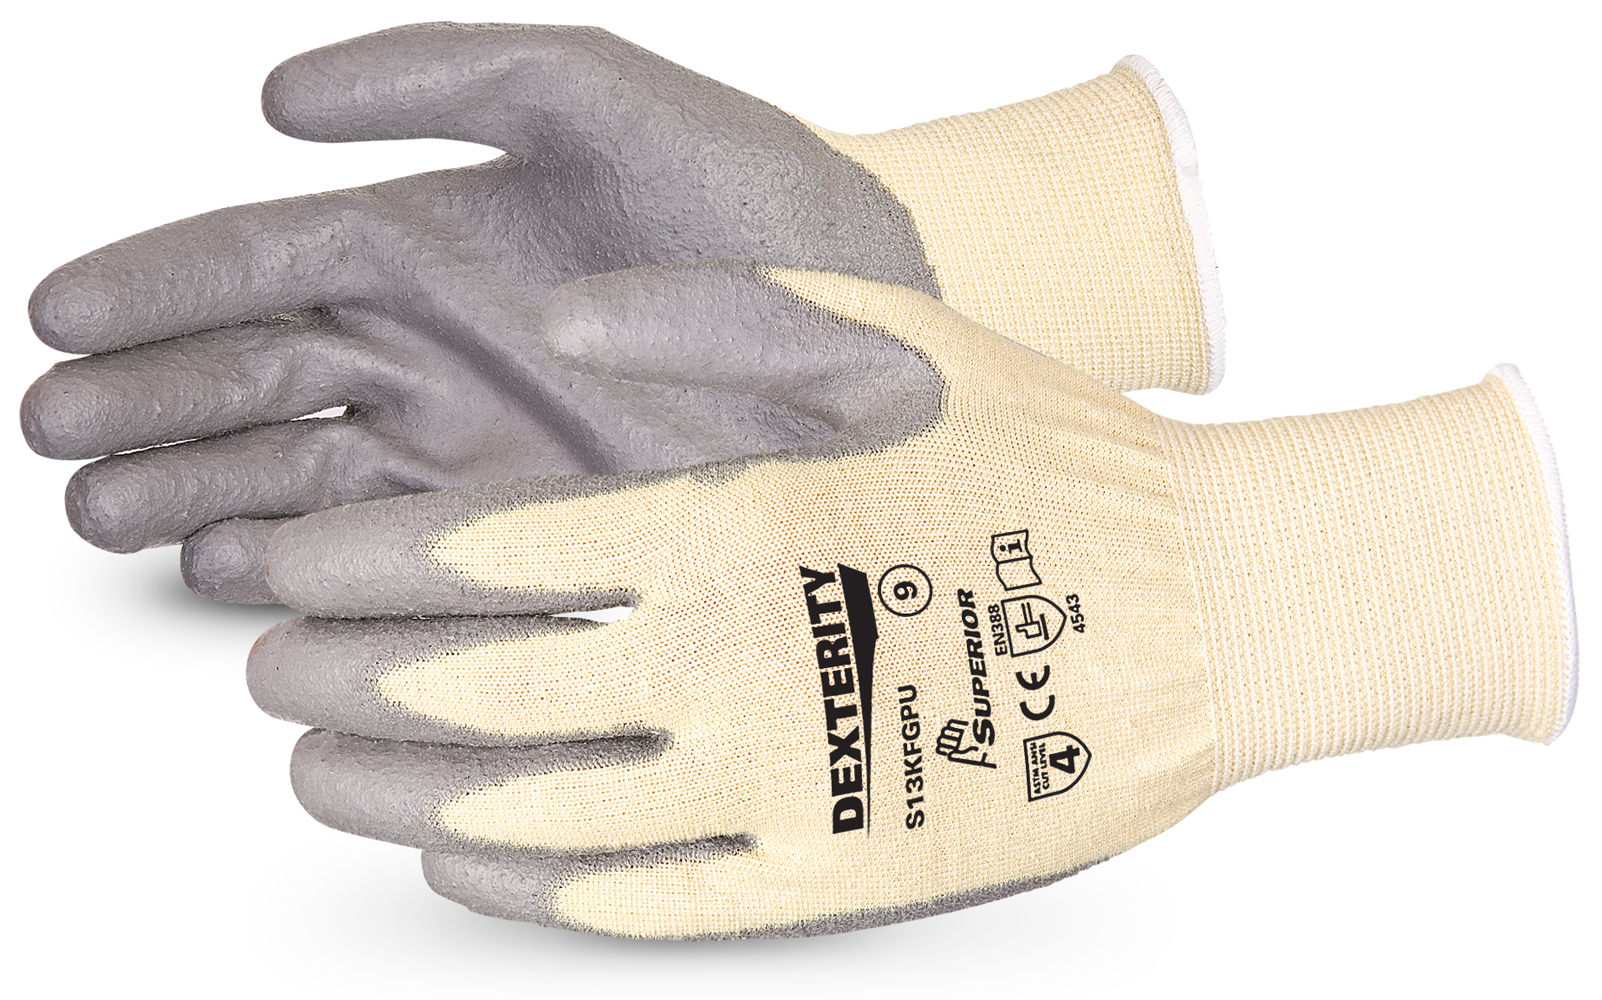 Dexterity PU Palm-Coated Cut-Resistant String-Knit Glove